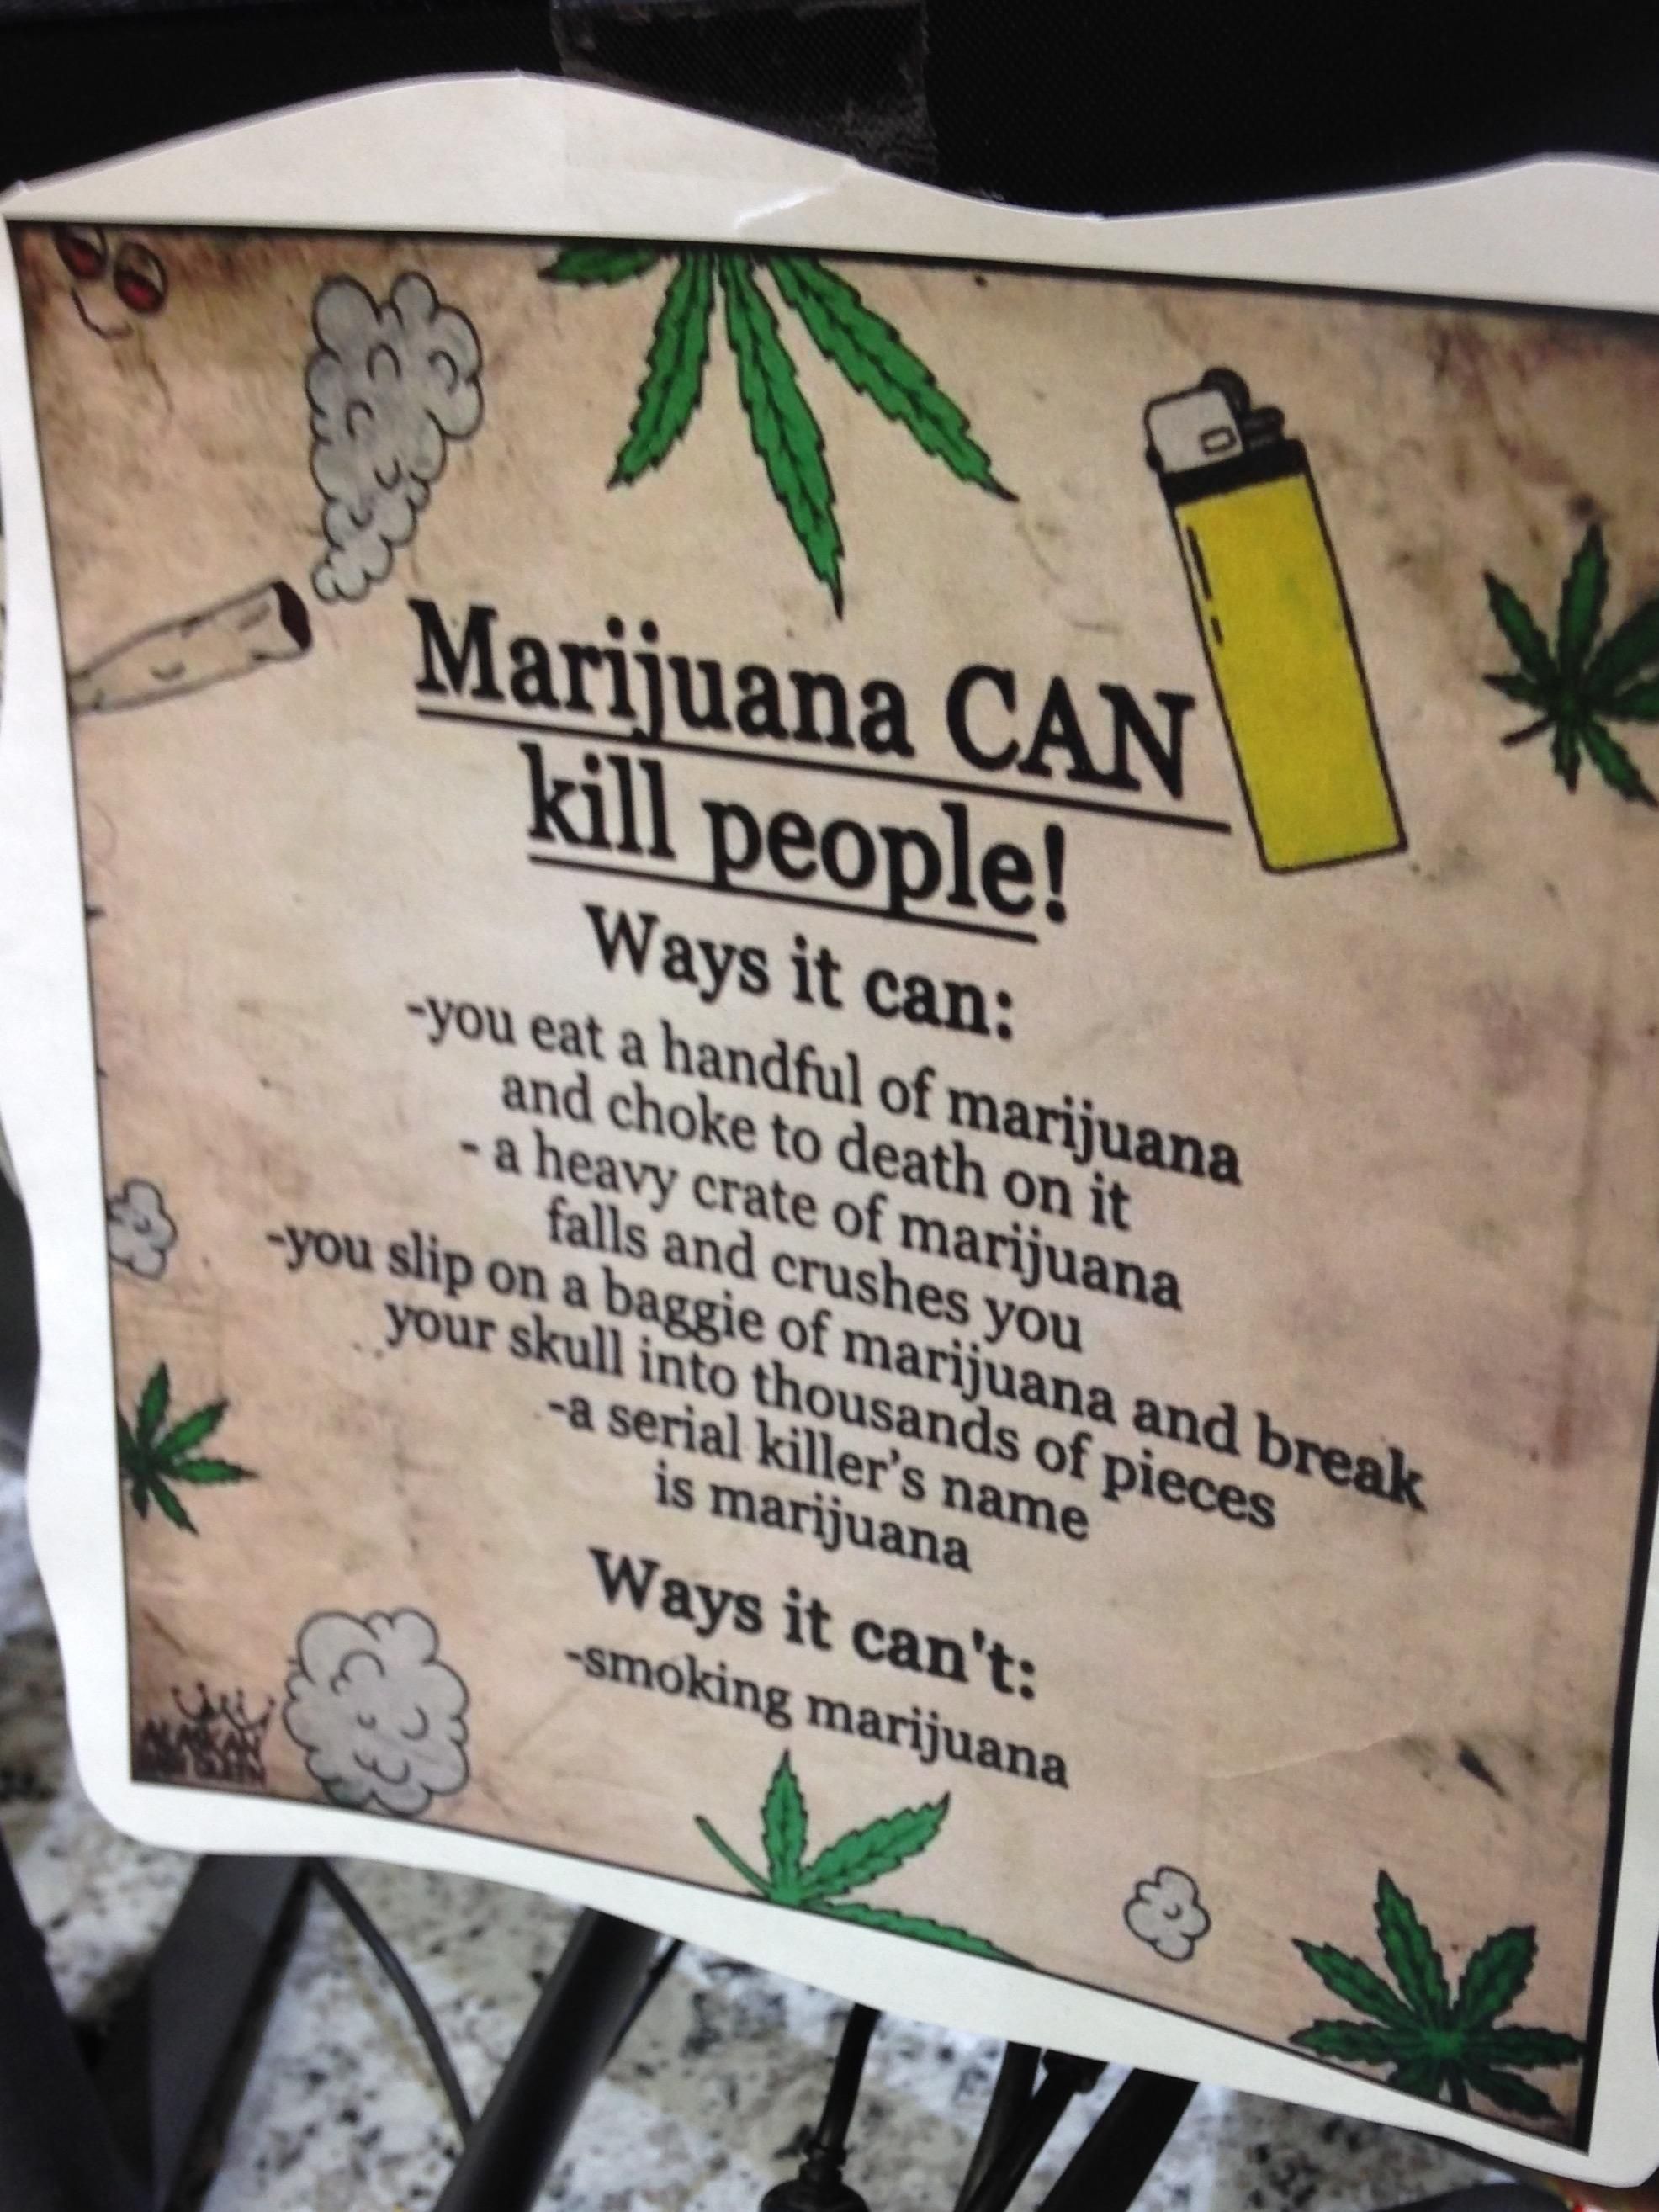 This was in my local dispensary in Portland, OR. WEED can KILL!